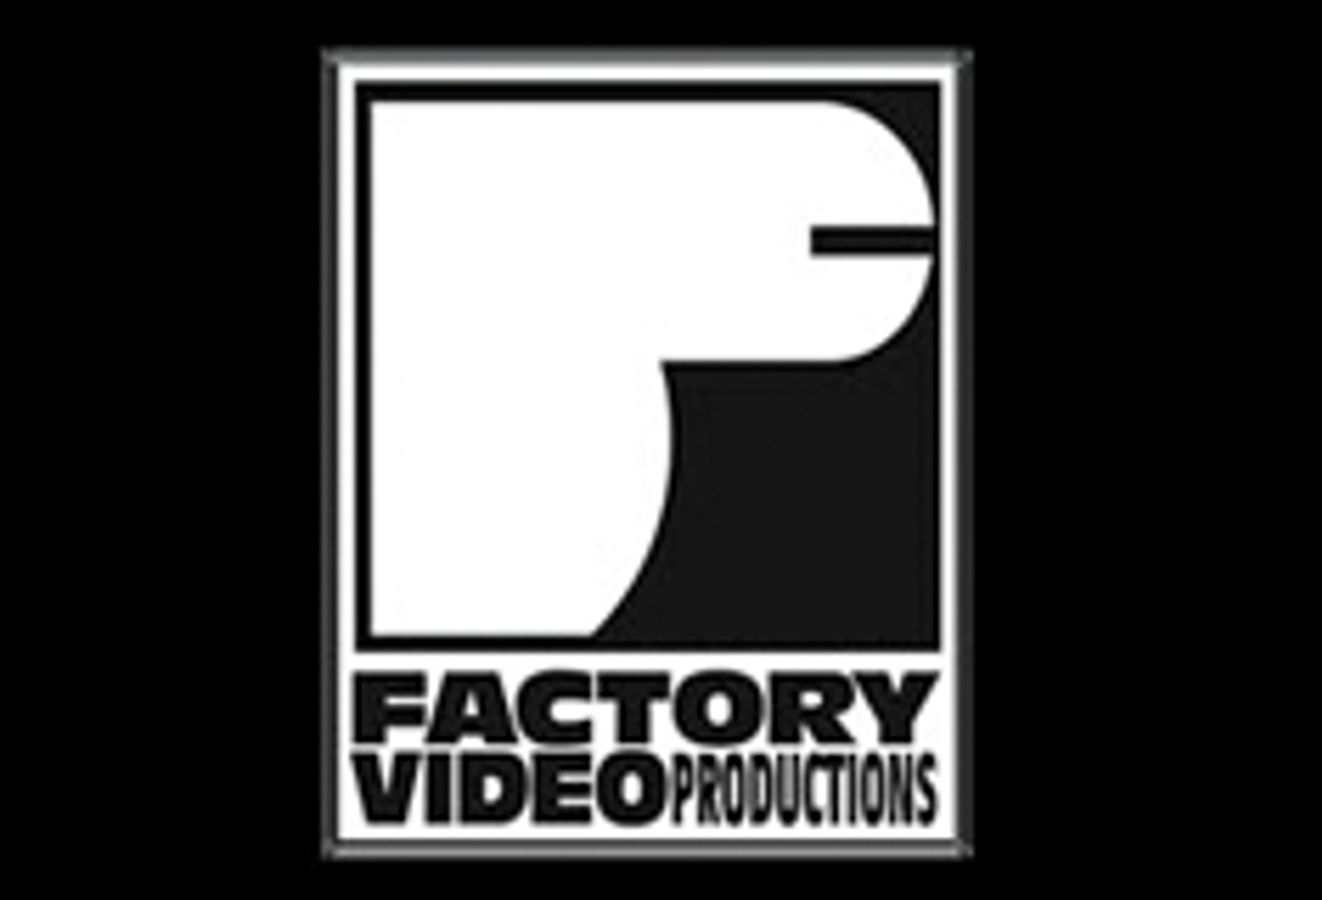 Factory Video Productions